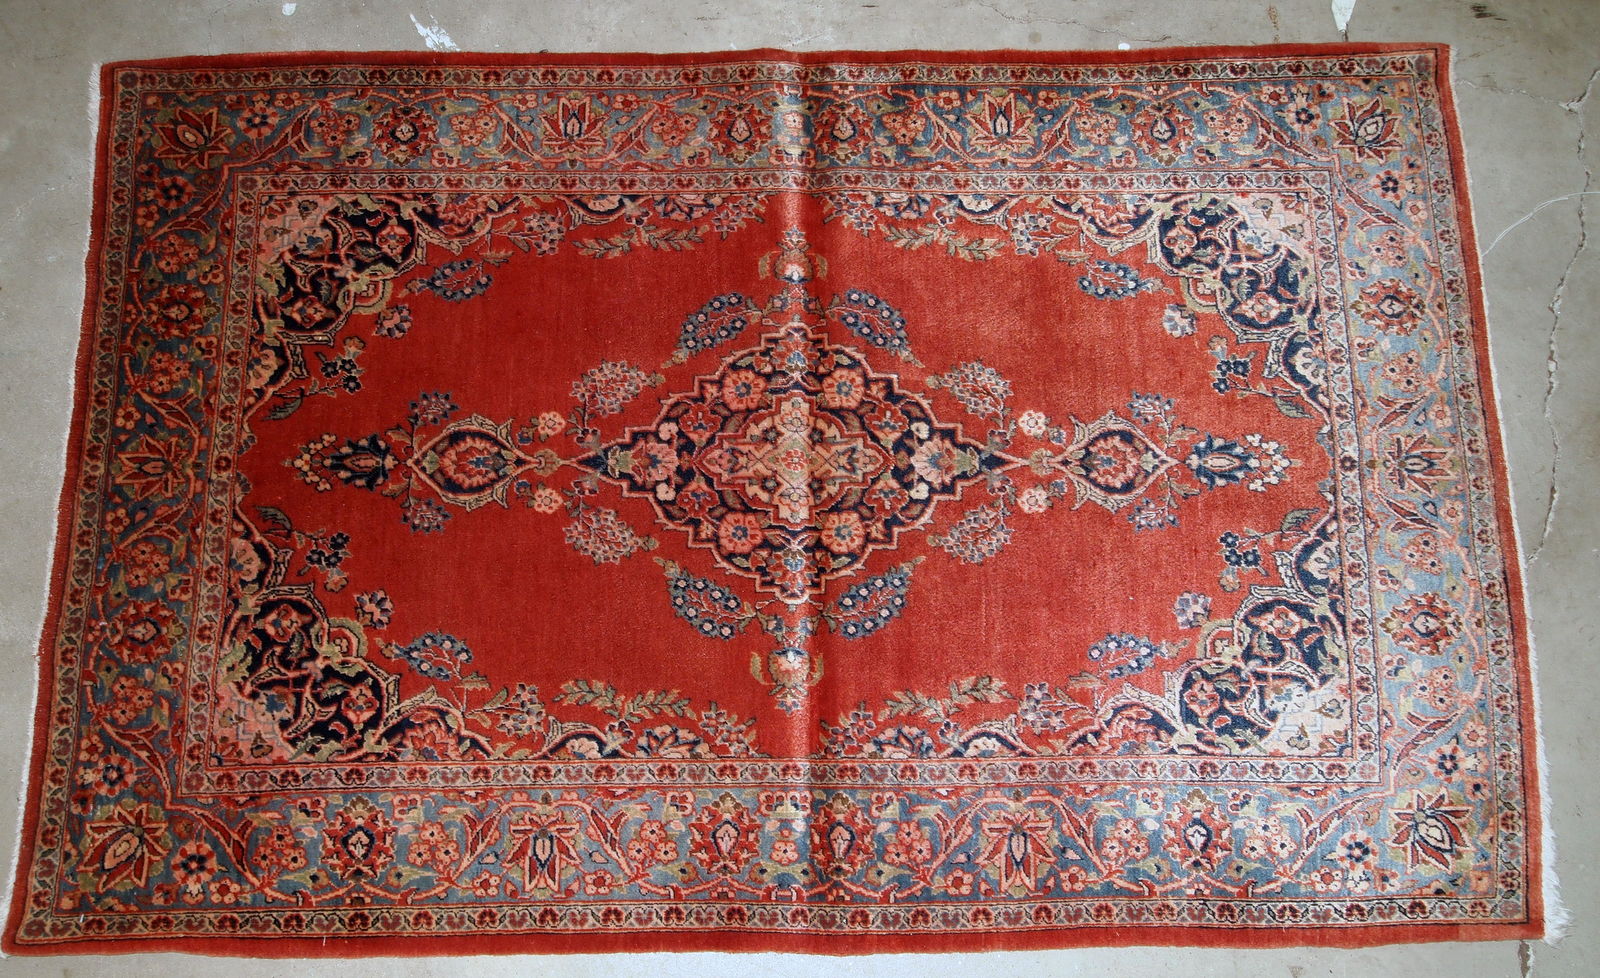 Handmade antique Persian Sarouk rug in original good condition. The rug is from the beginning of 20th century made in bright red wool. 